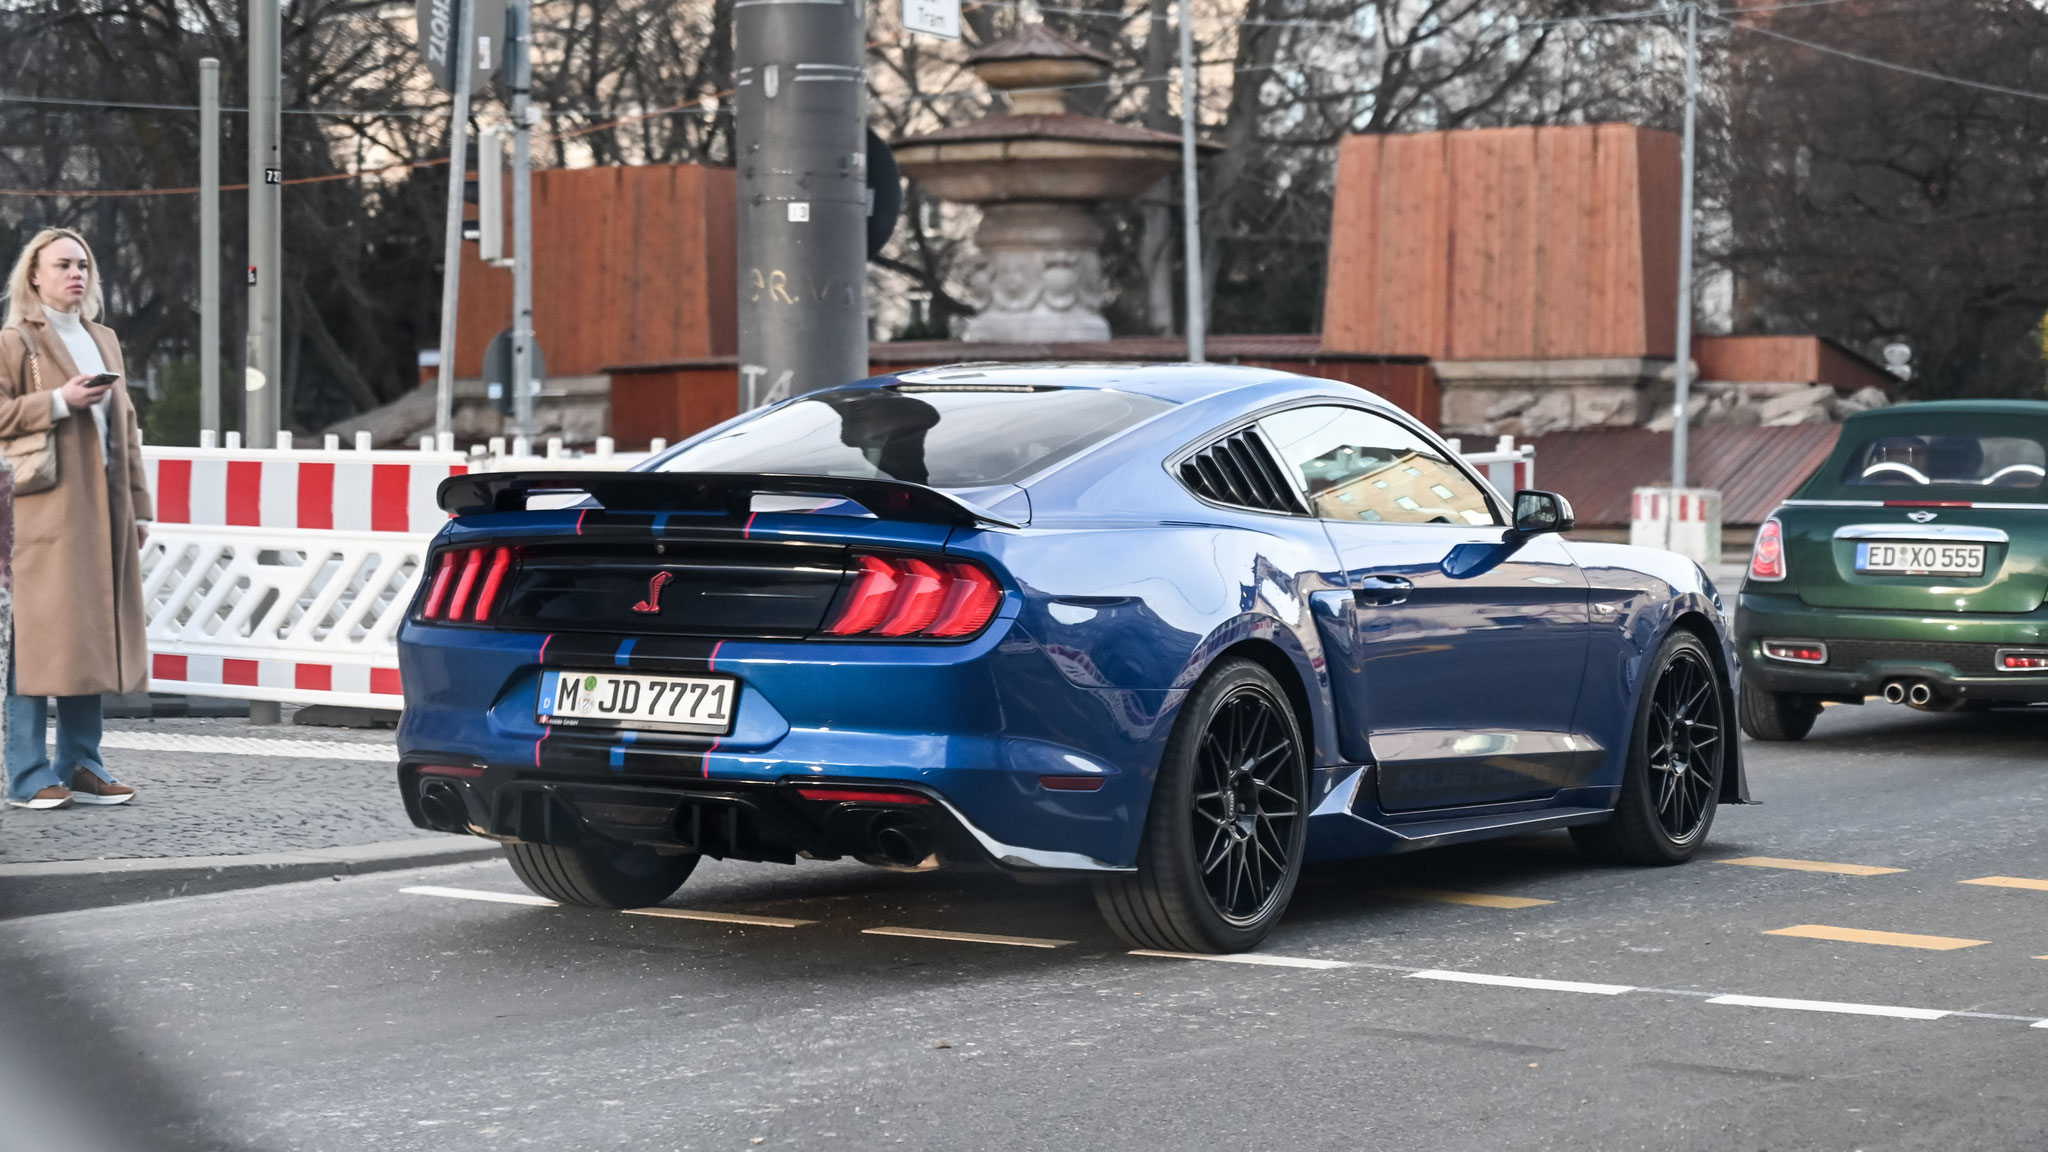 Ford Mustang Shelby GT 350 - M-JD7771